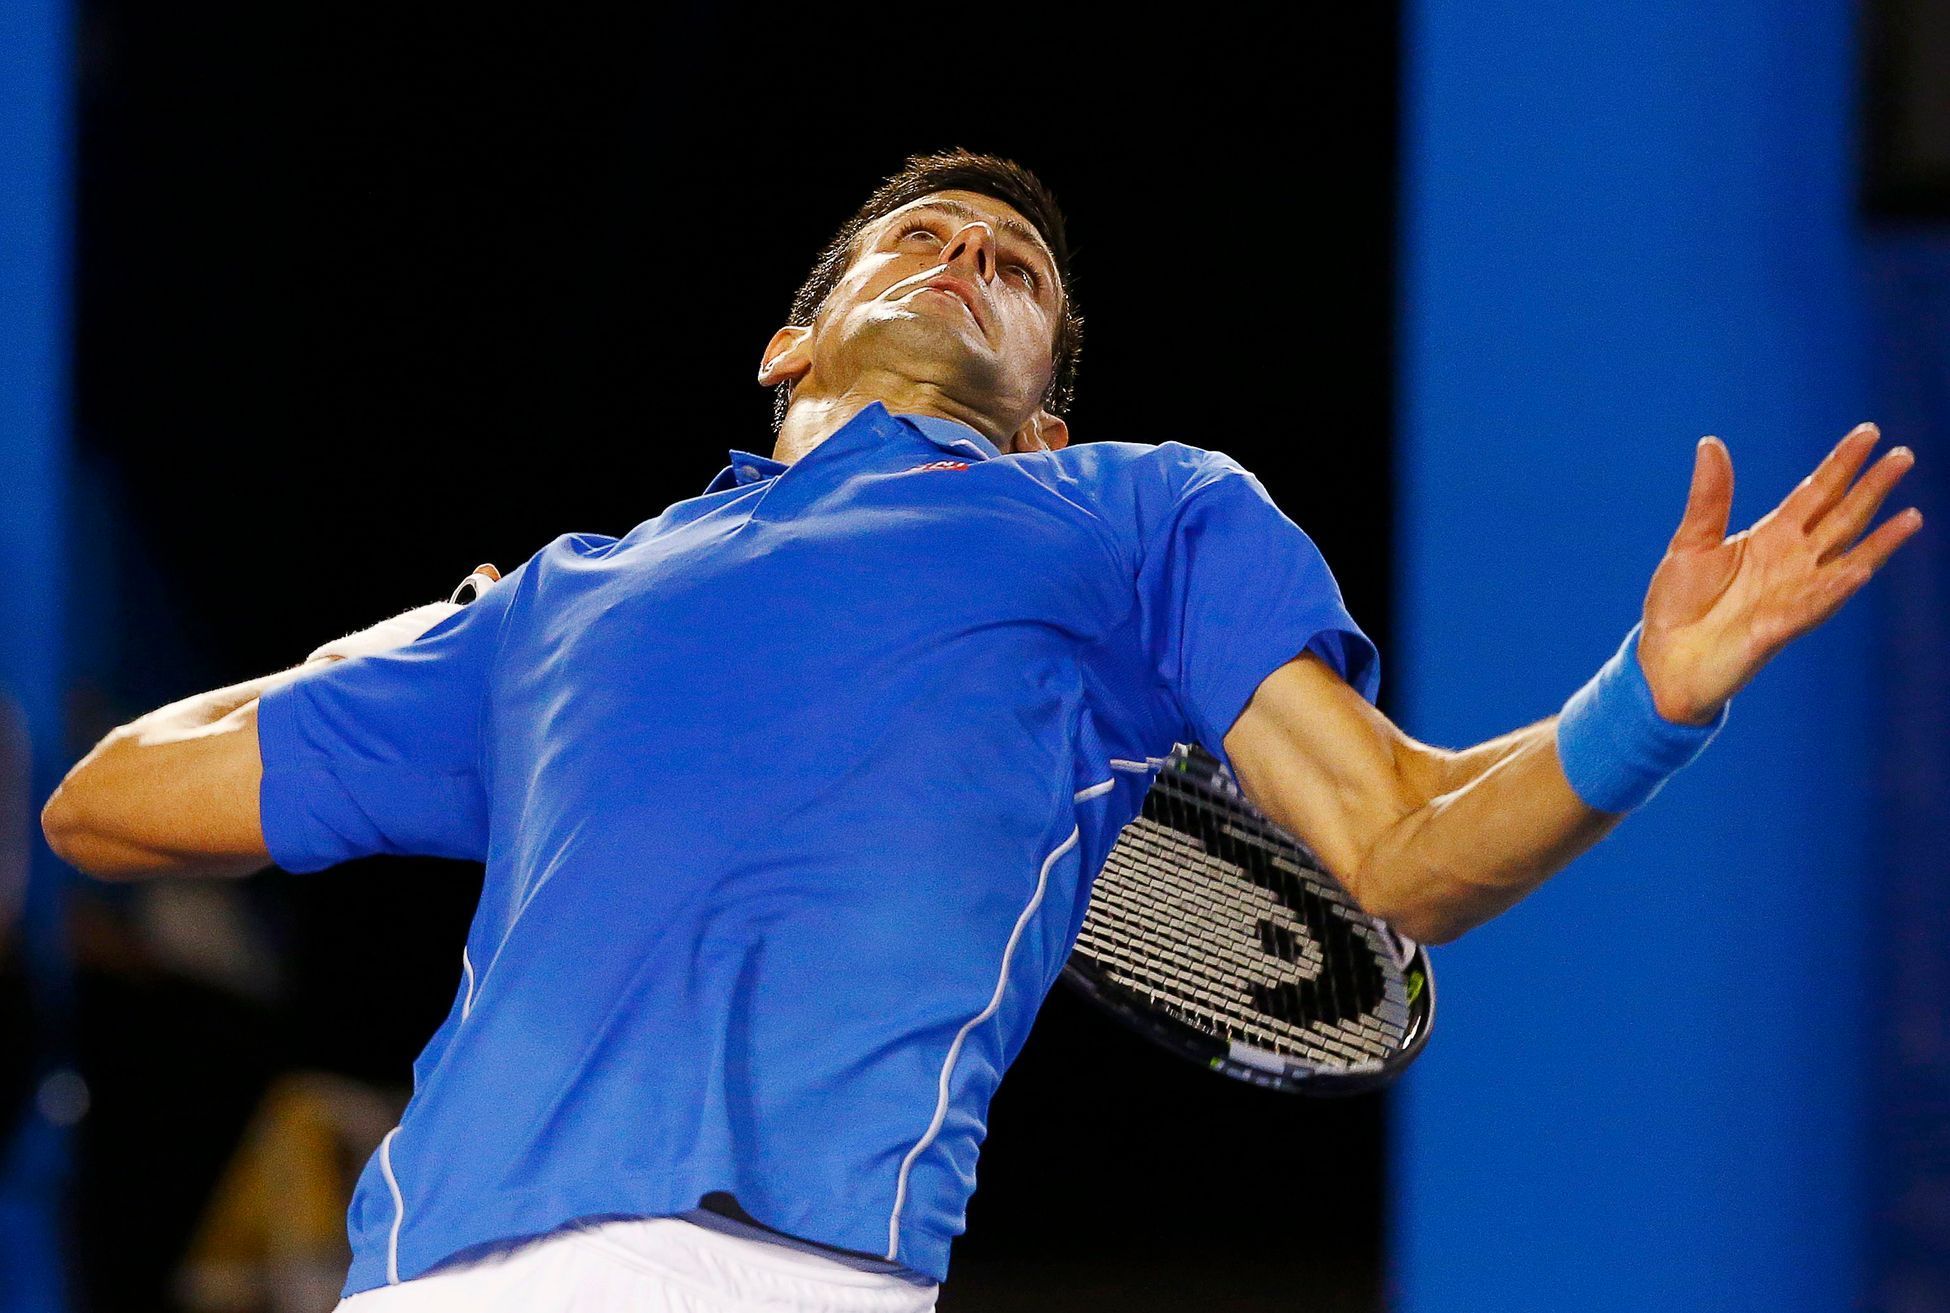 Djokovic of Serbia serves to Murray of Britain during their men's singles final match at the Australian Open 2015 tennis tournament in Melbourne